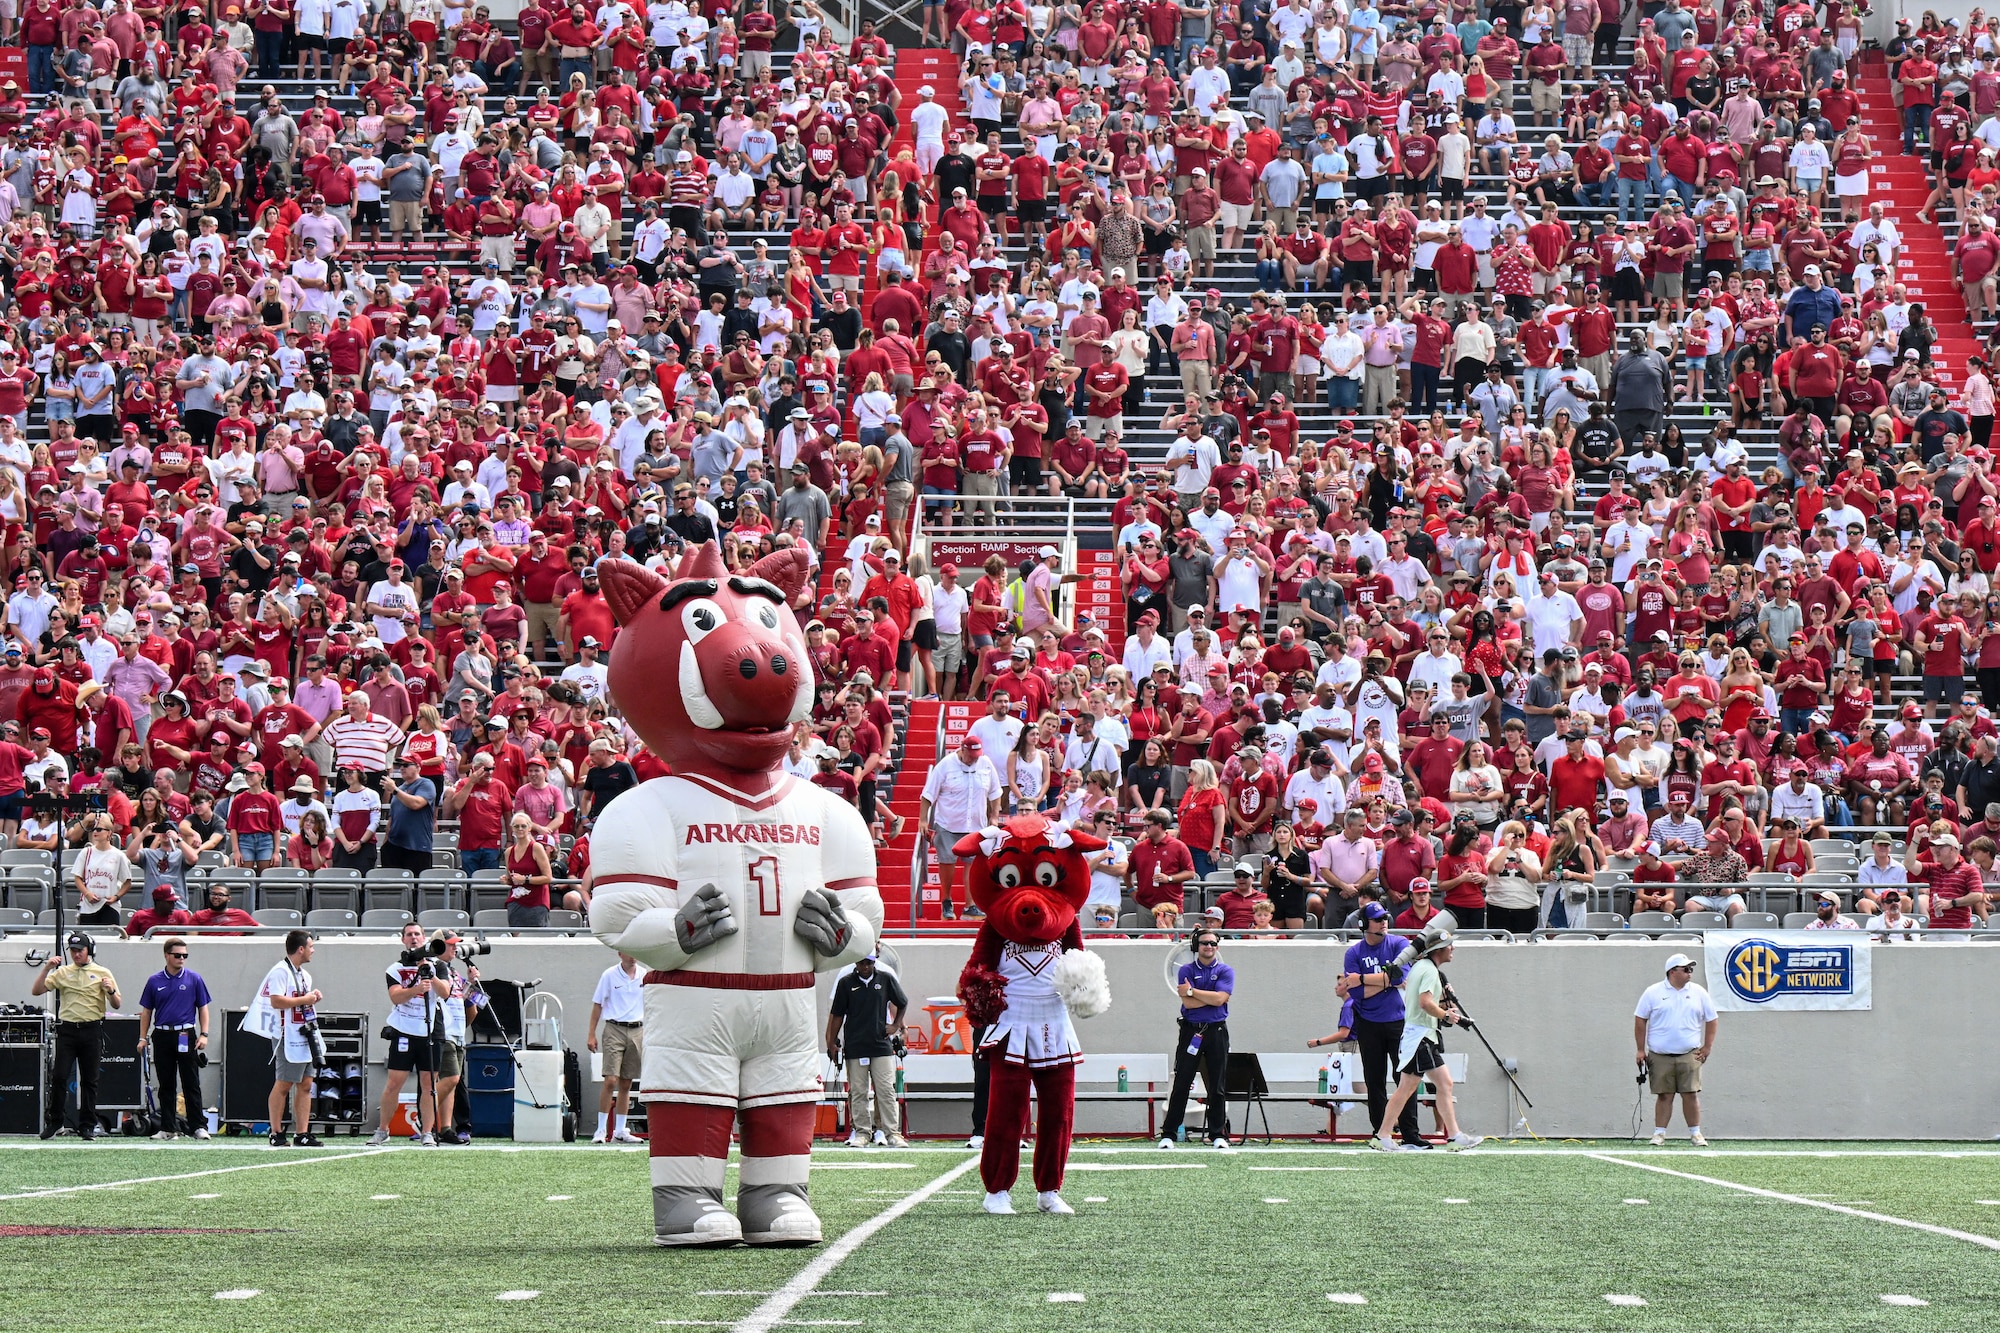 Tusk, the University of Arkansas Razorback’s mascot, stands on the field during a season-opening football game